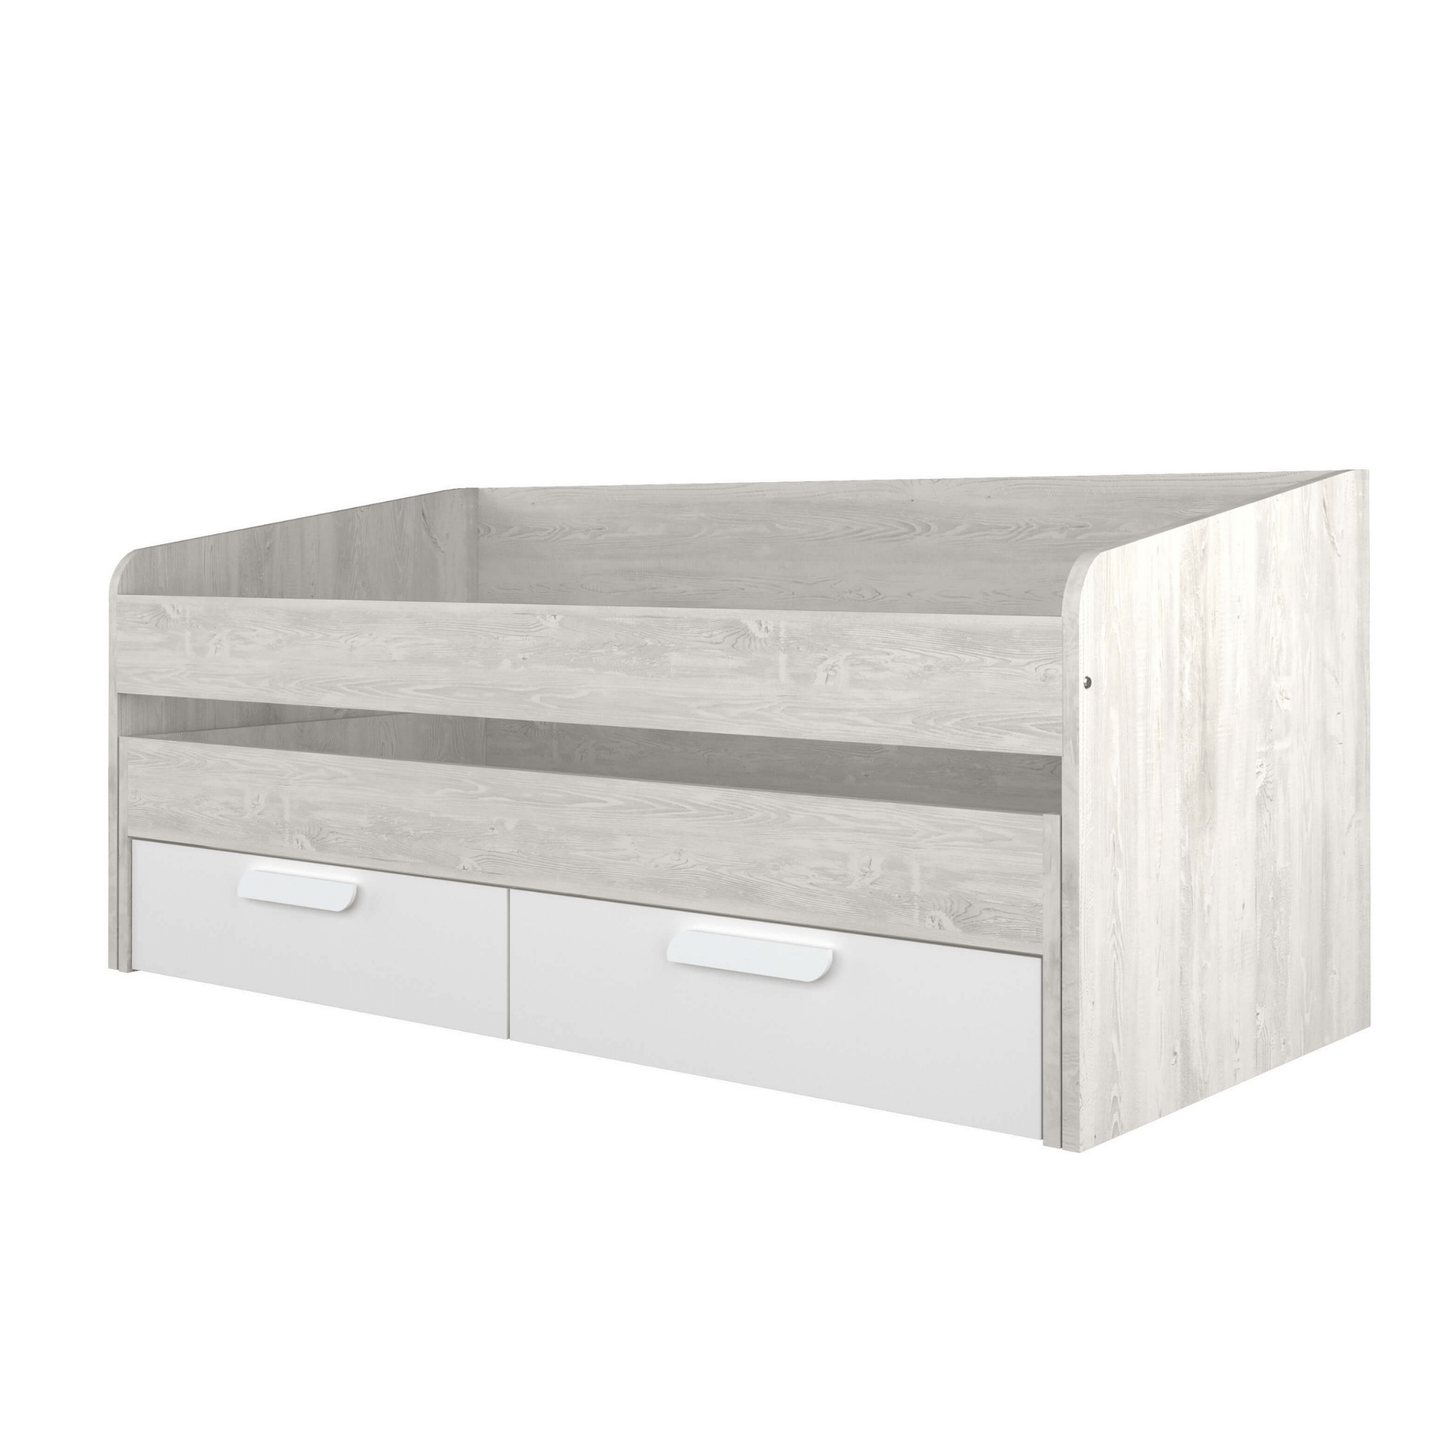 Trasman Terrassa Daybed with Trundle Pull Out Bed & Drawers Cut Out Closed